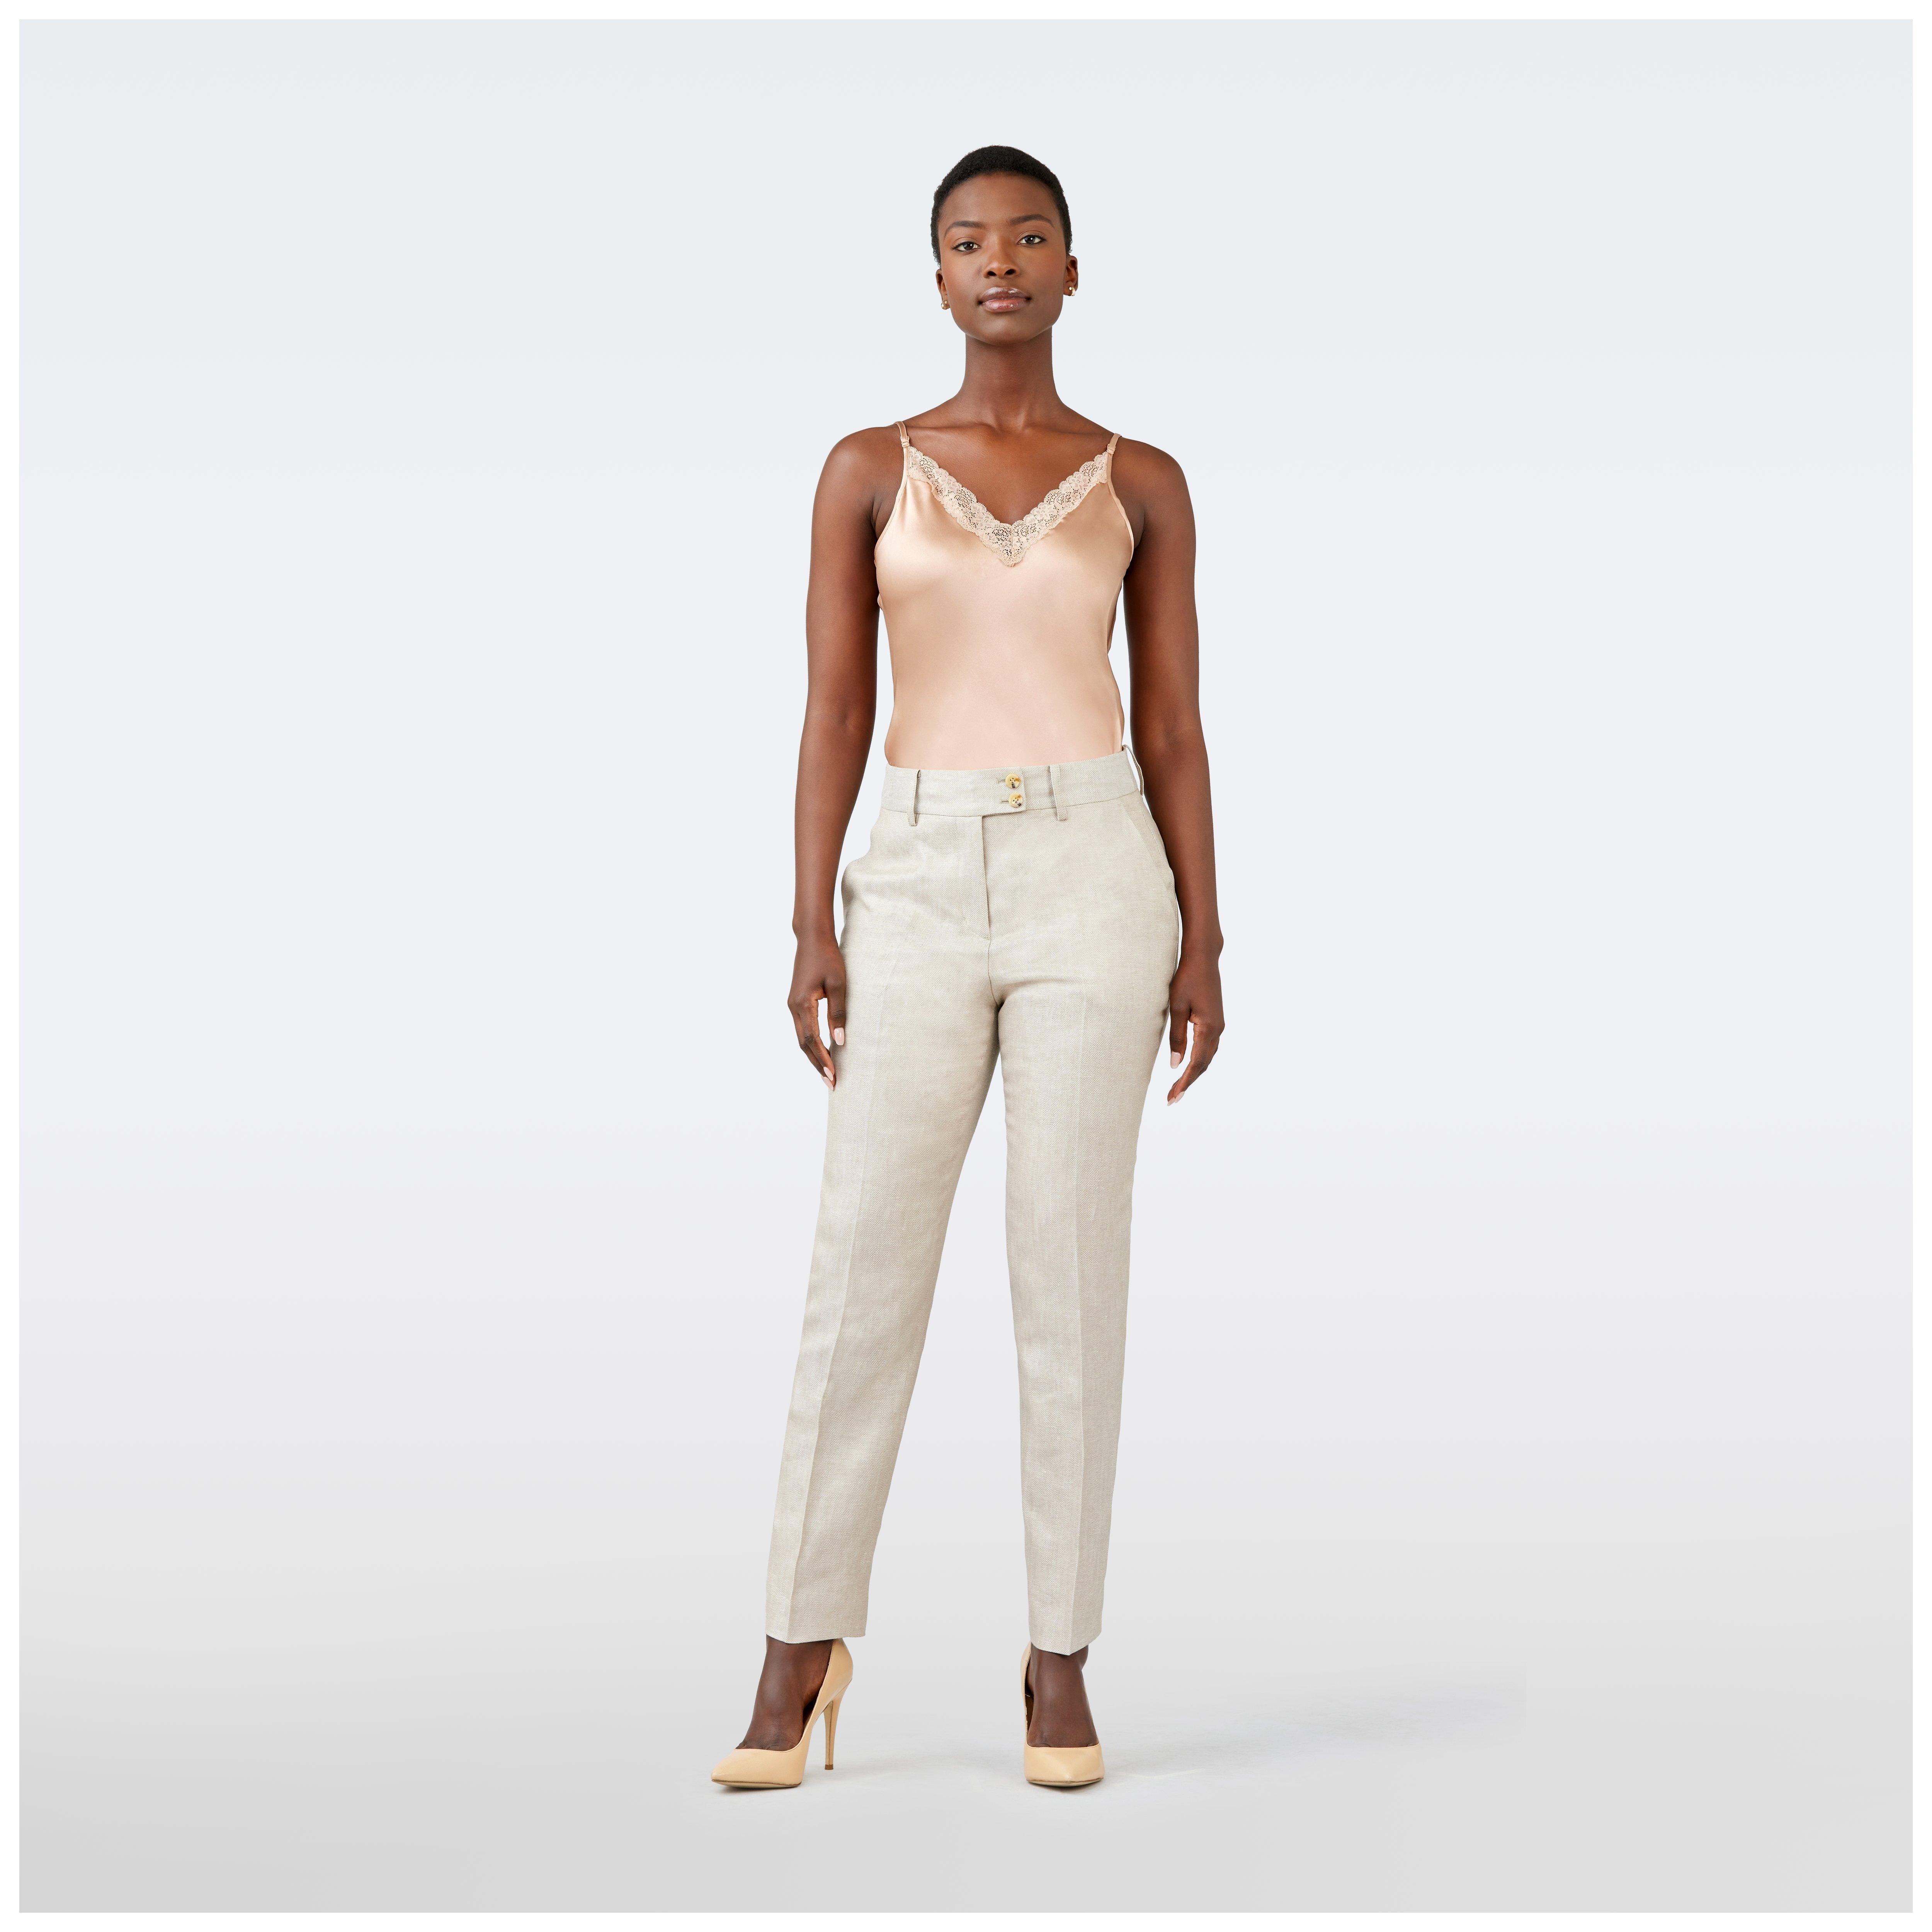 How to Wear White Dress Pants: Top 13 Outfit Ideas for Women - FMag.com